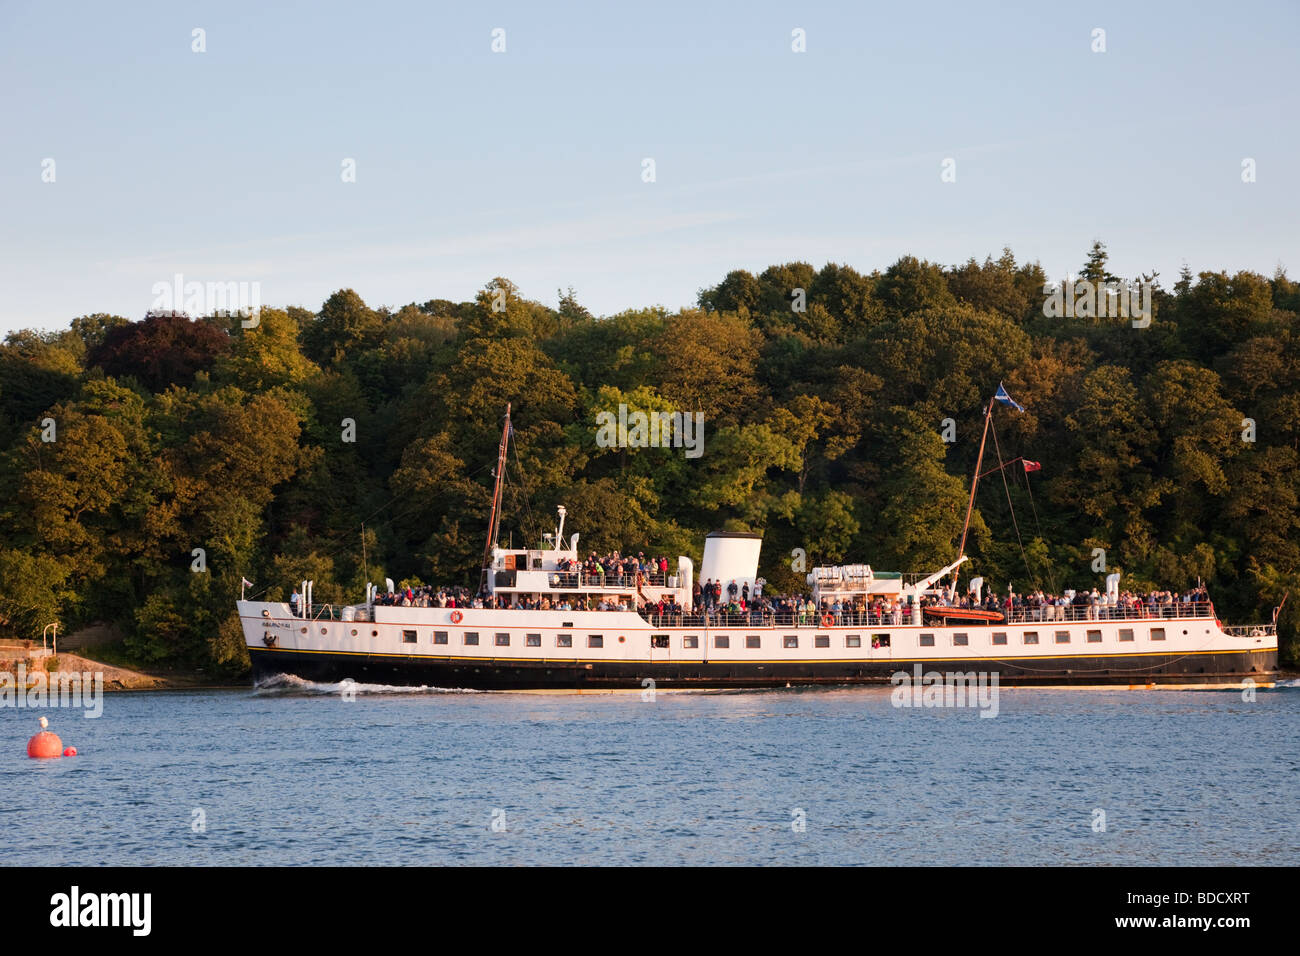 Die Runde Insel Sightseeing cruise in der Menai Straße am Porthaethwy Isle of Anglesey North Wales UK M V Balmoral-Dampfschiff Stockfoto